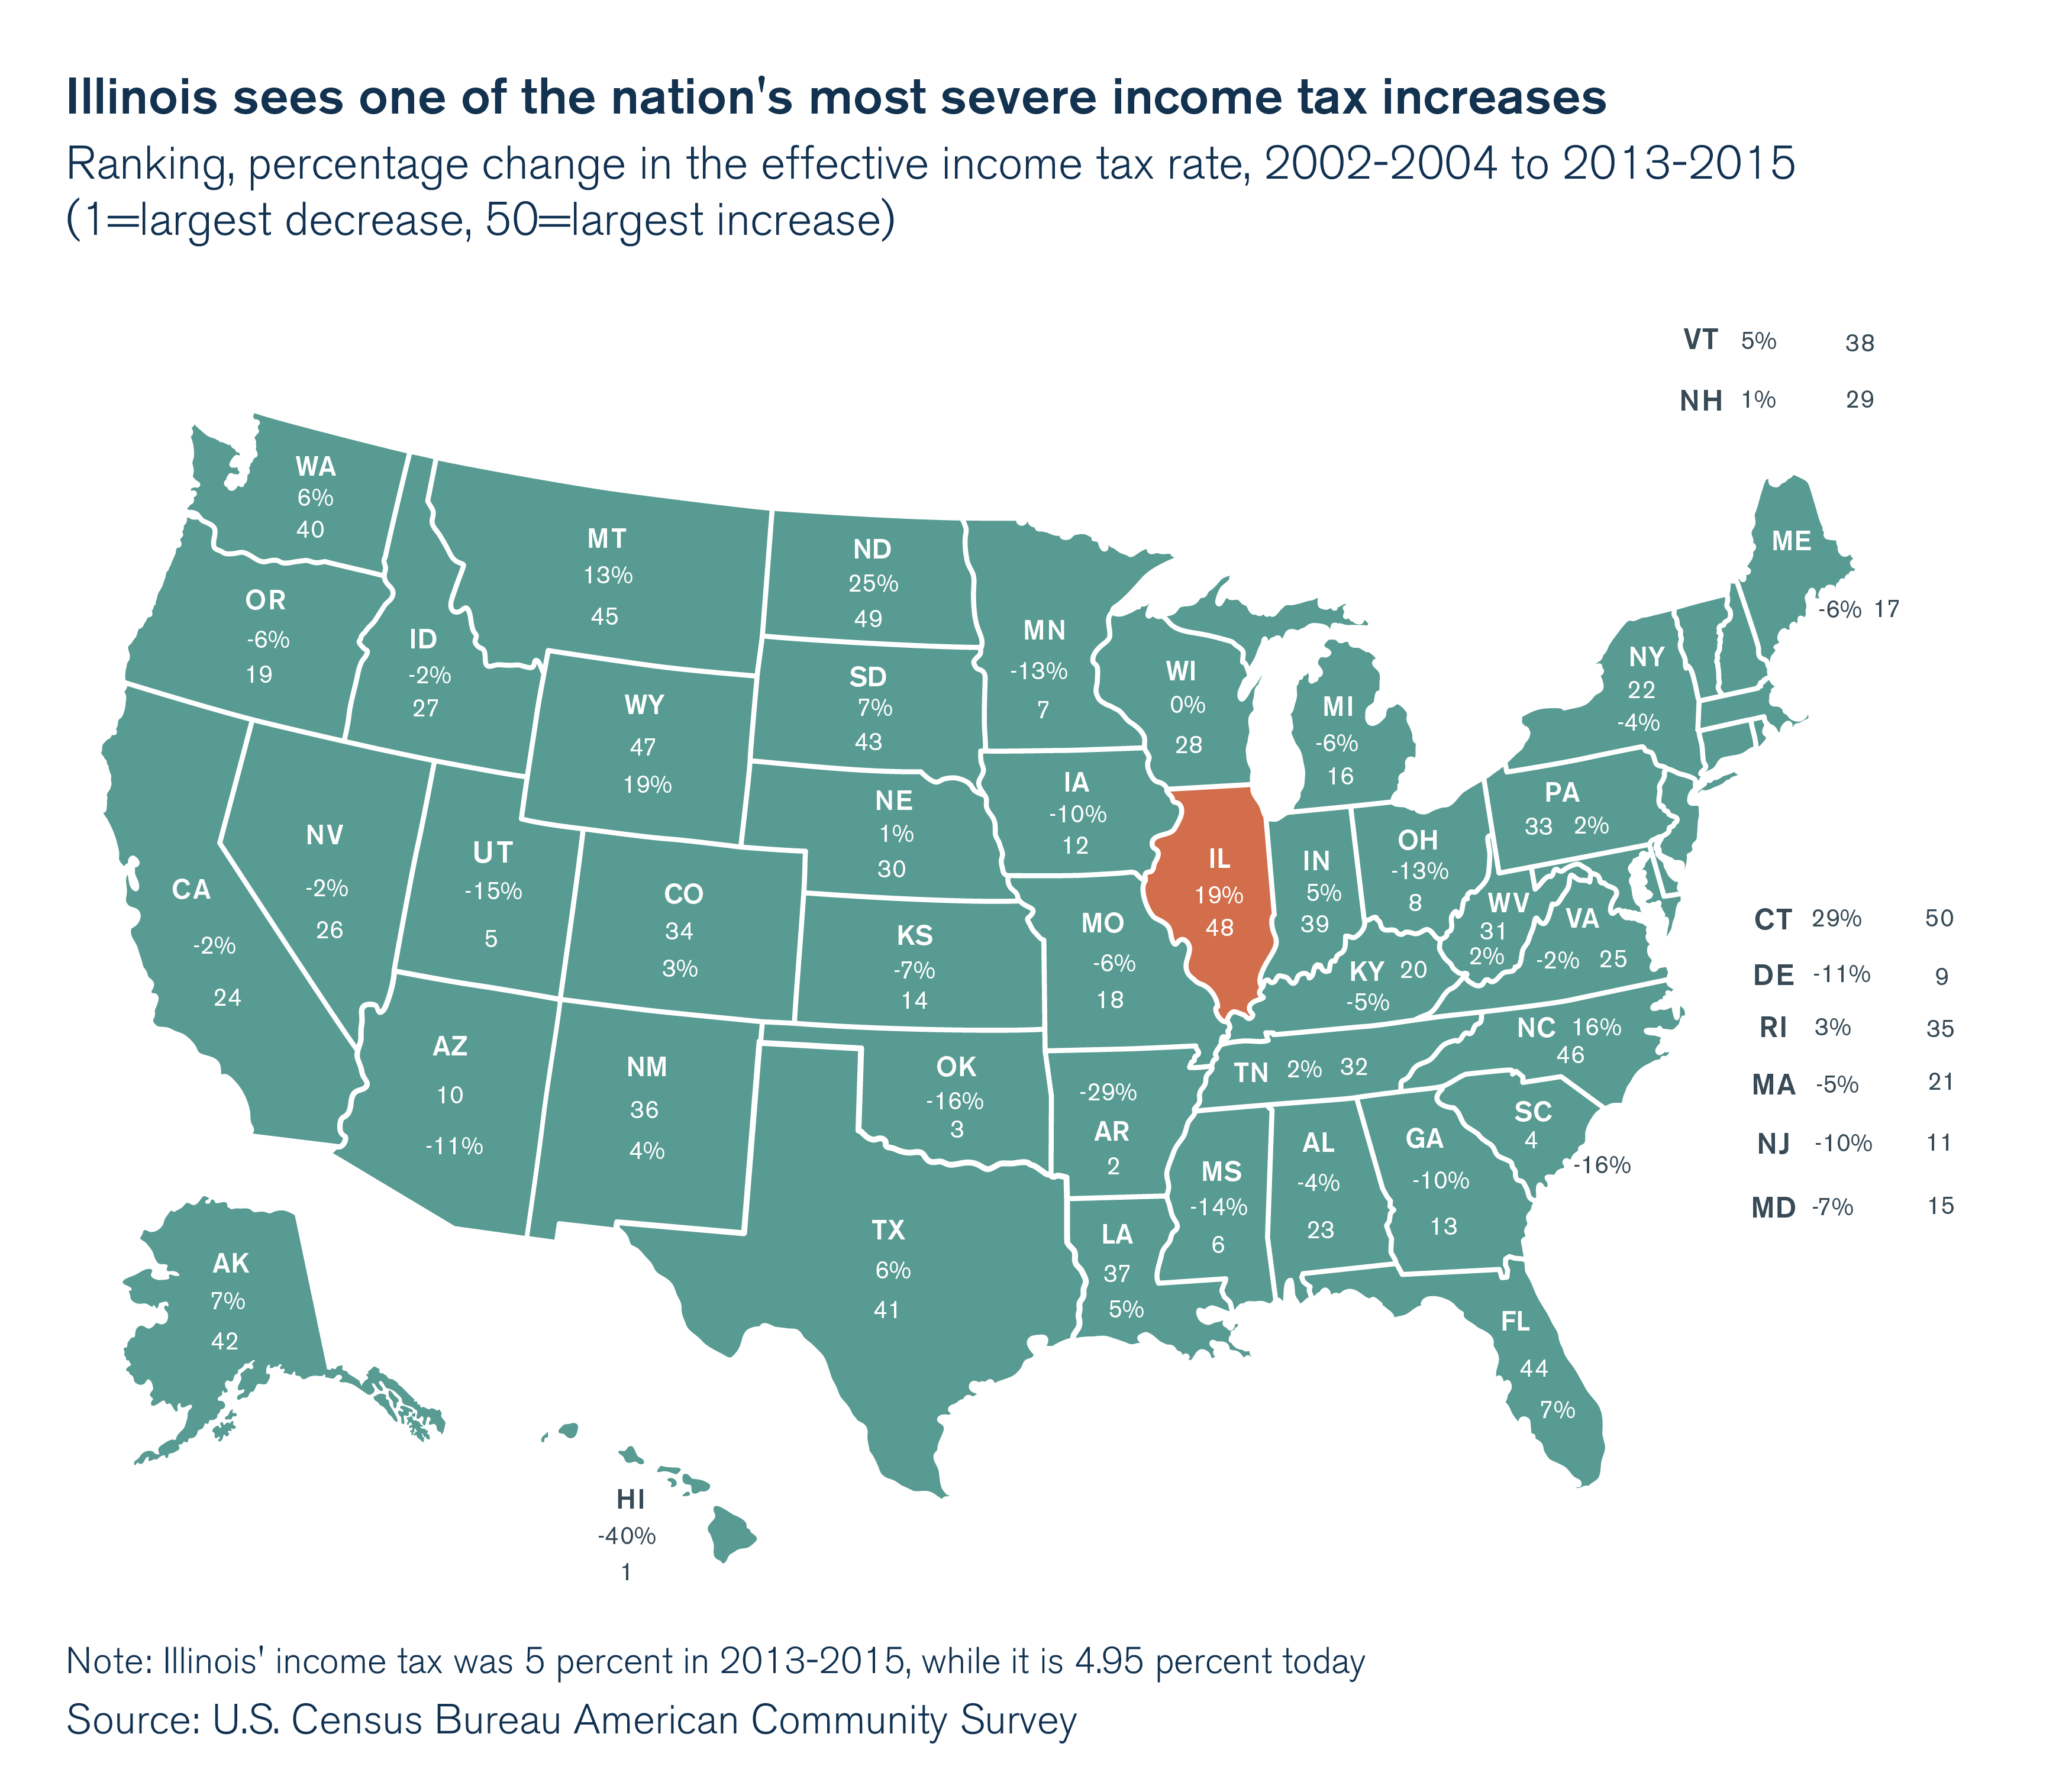 Illinois sees one of the nation's most severe income tax hikes